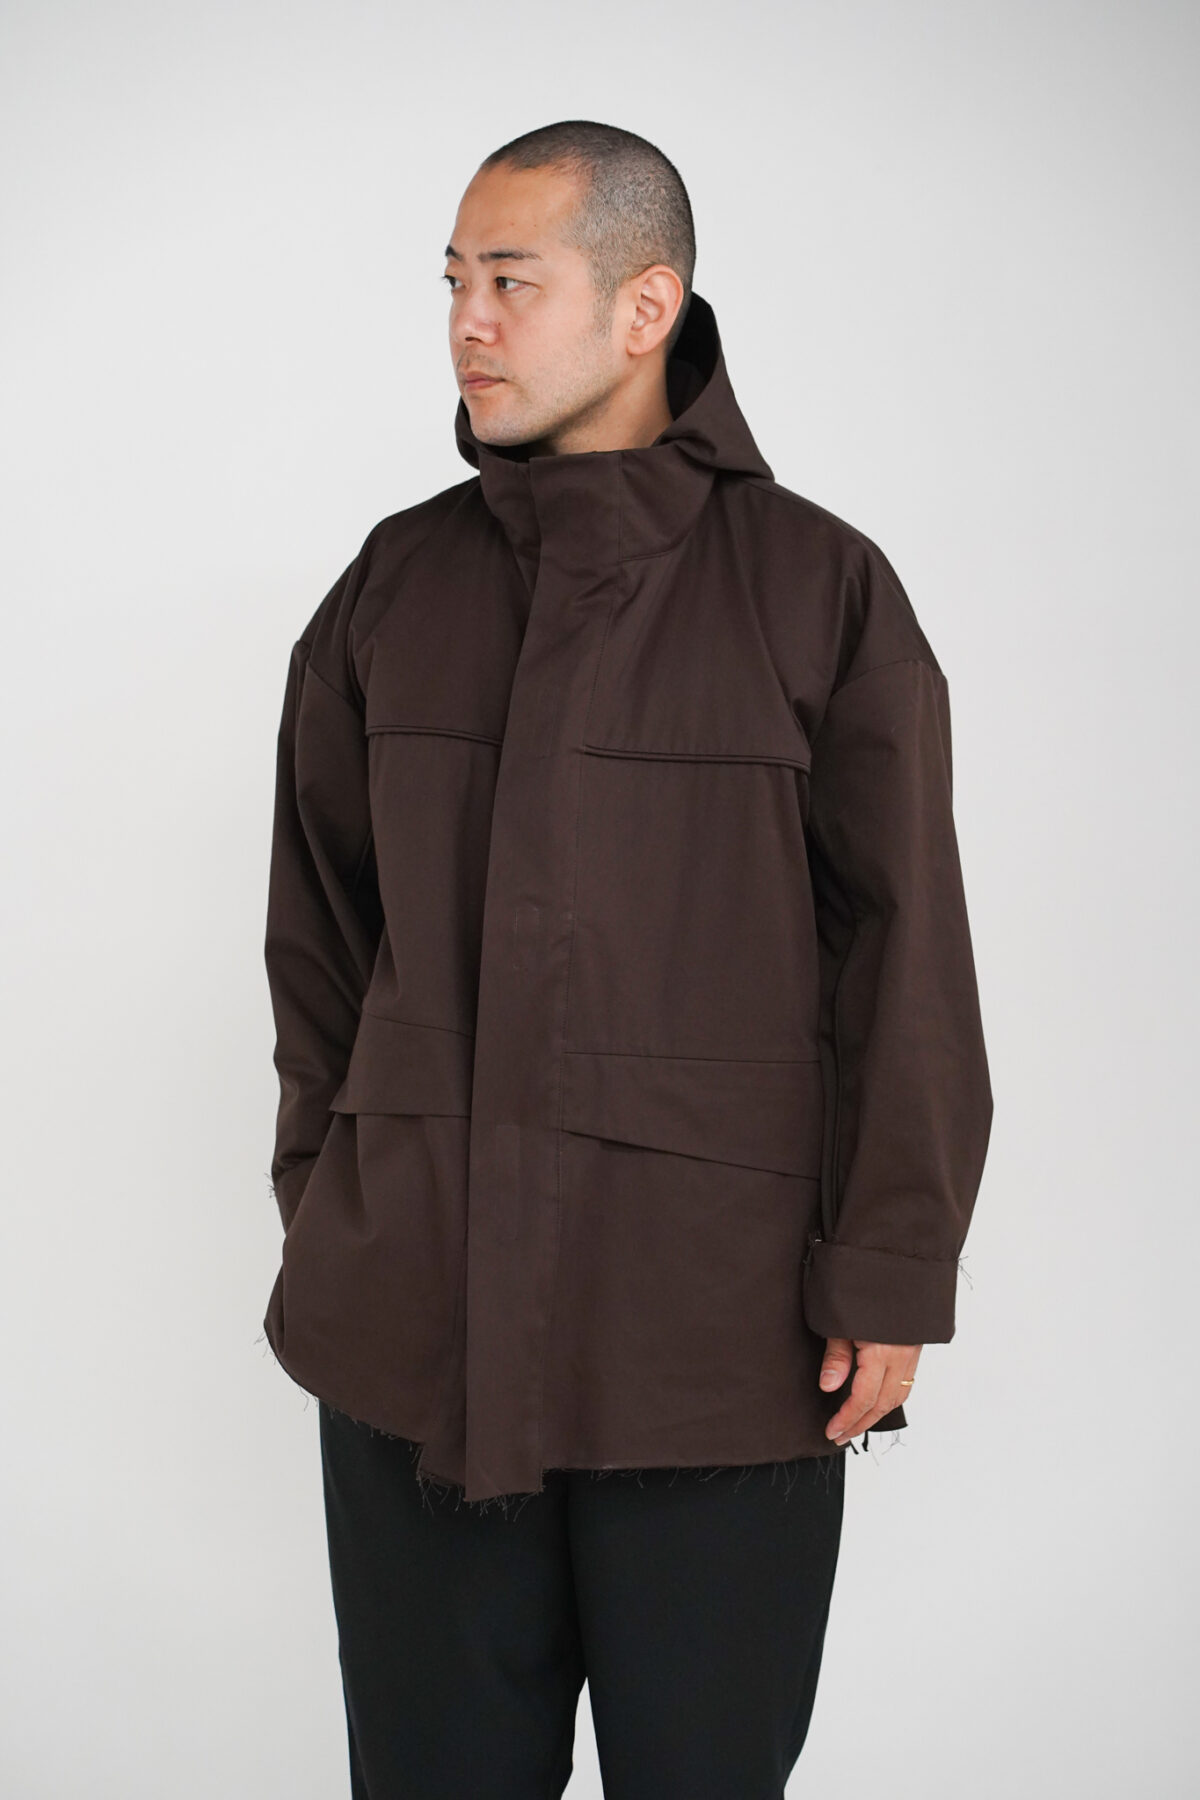 CF.12.09.13 POST JACKET COTTON WOVEN TEWILL | FUDGE UP NOTHING